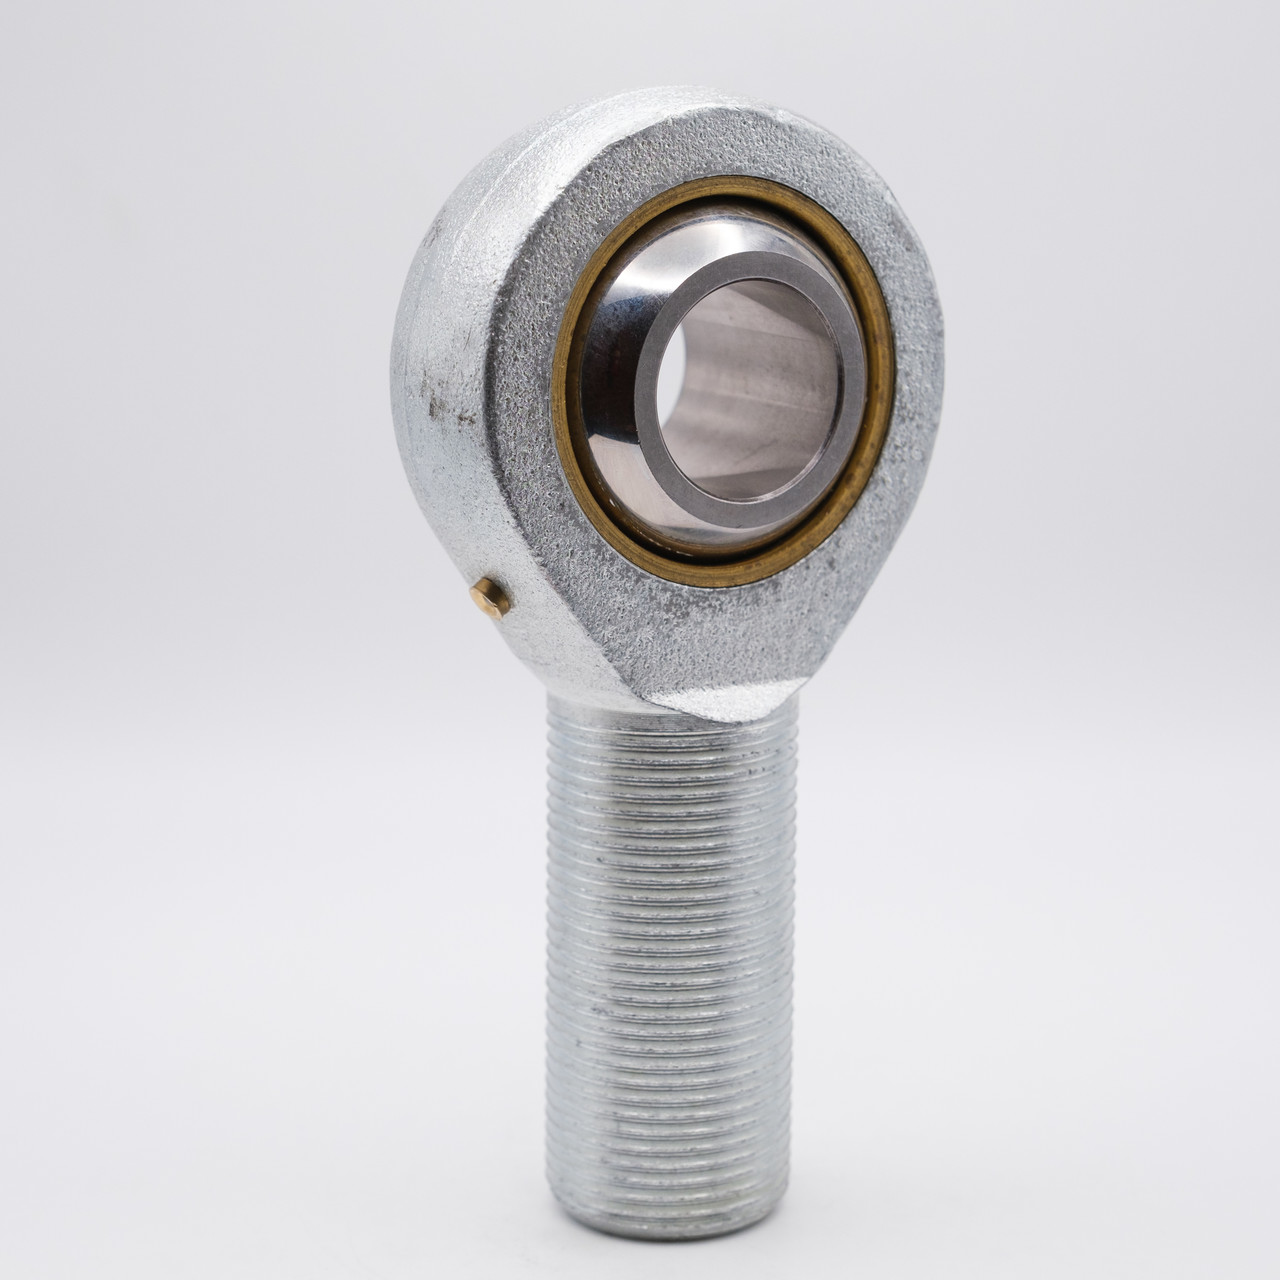 3mm POS3 Male Rod-End Bearing Right Hand Side View